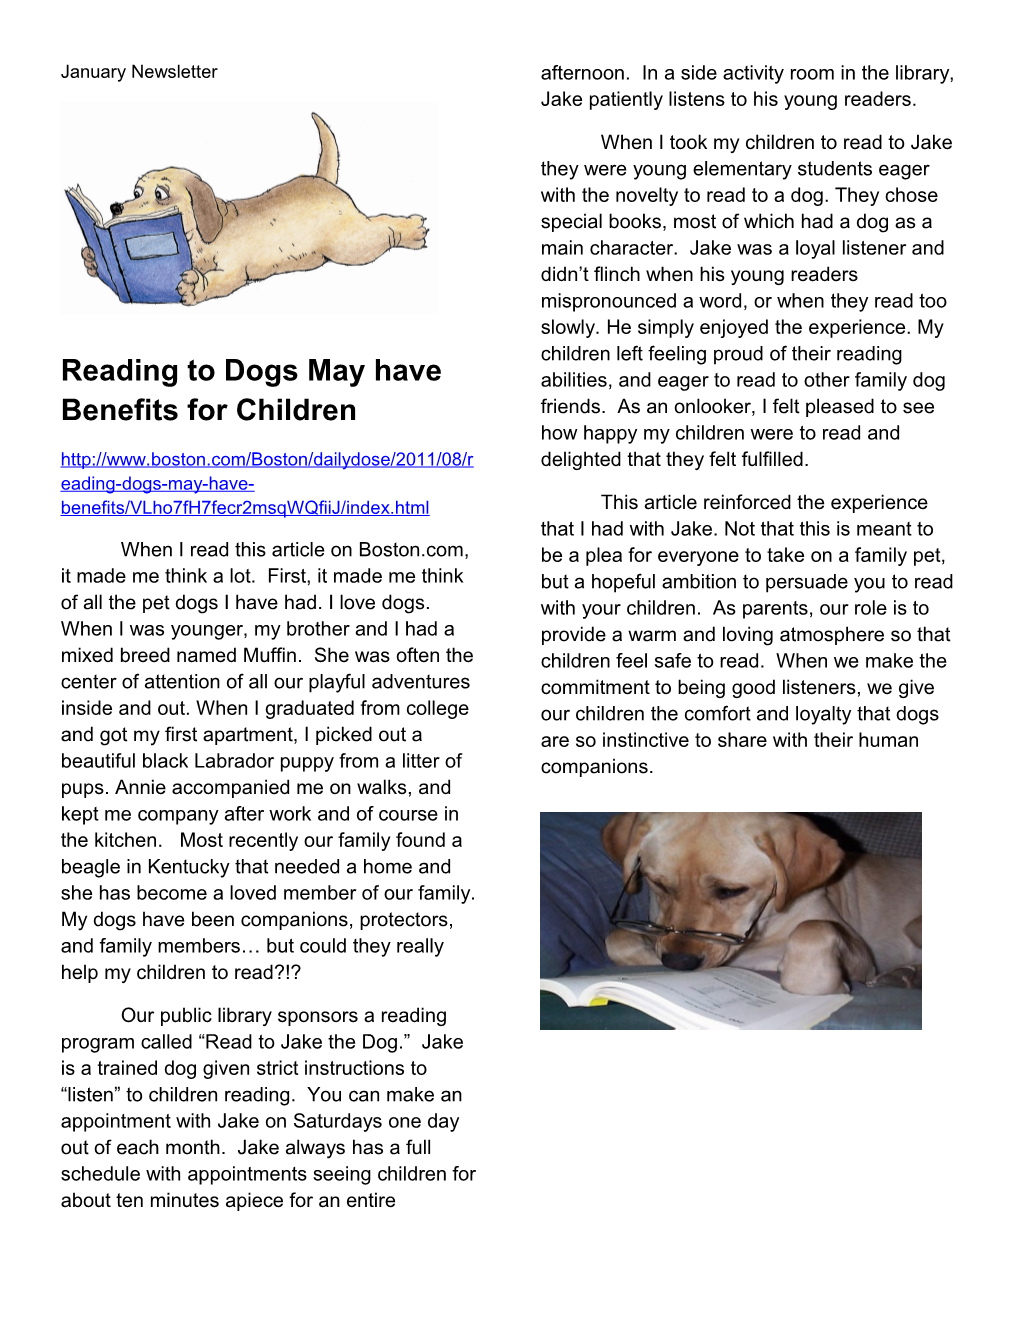 Reading to Dogs May Have Benefits for Children